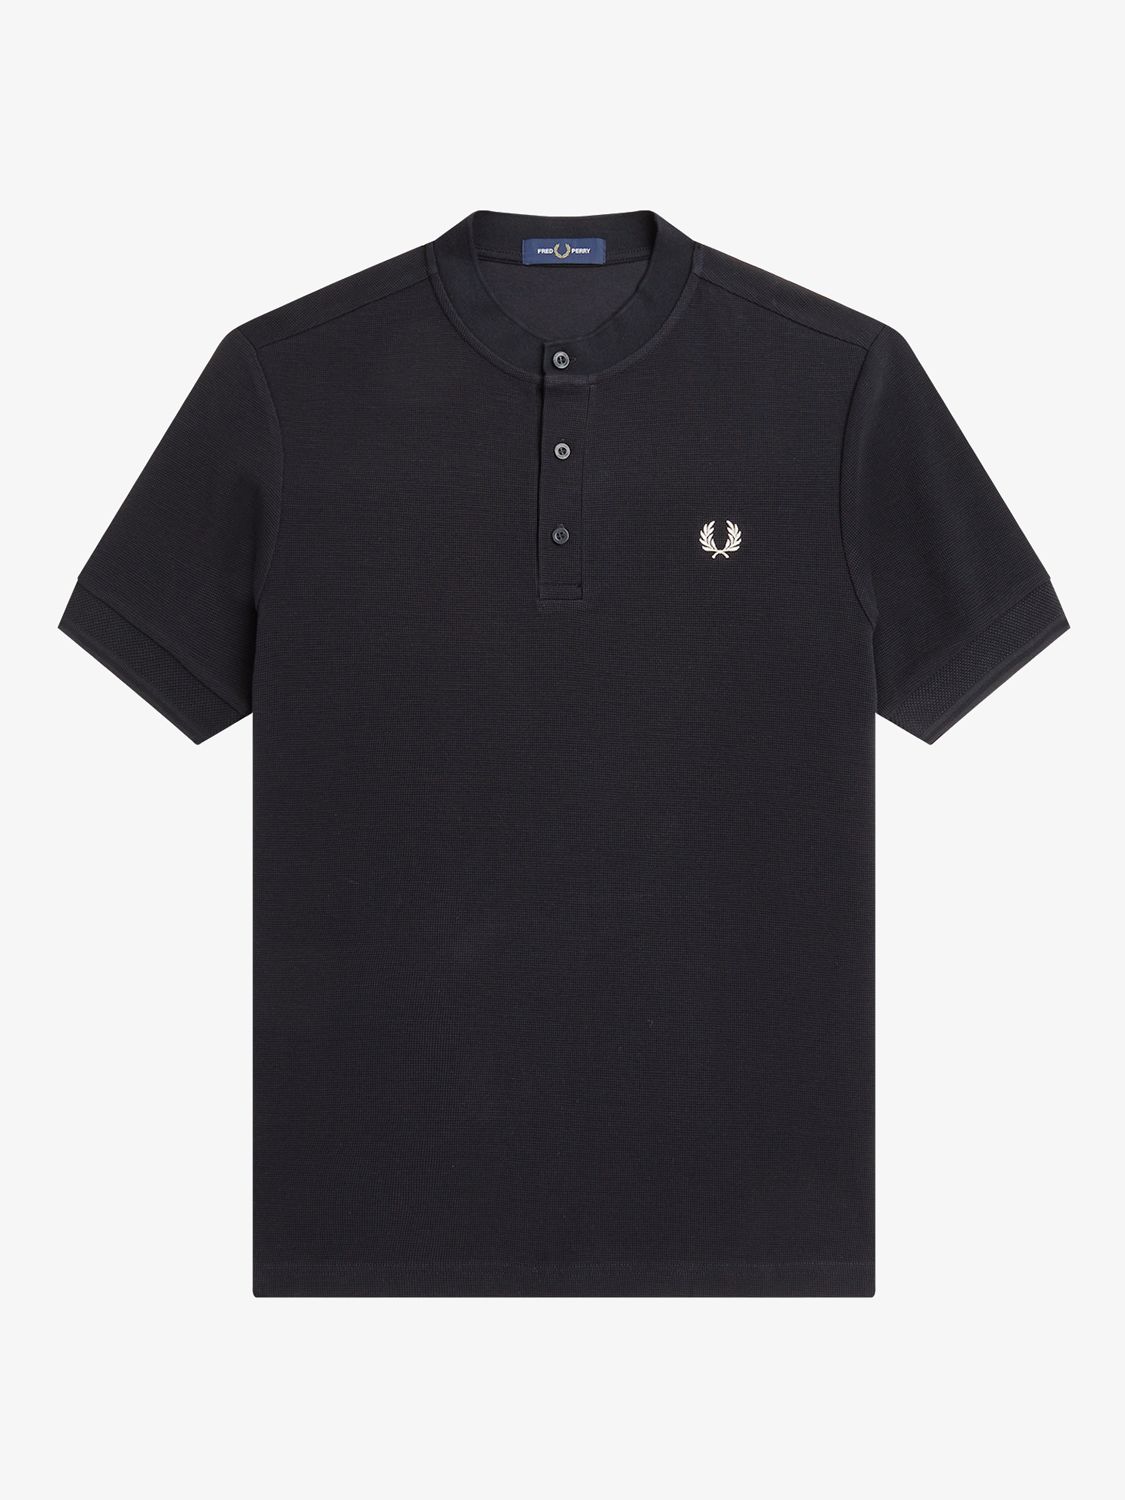 Fred Perry Short Sleeve Henley Top at John Lewis & Partners